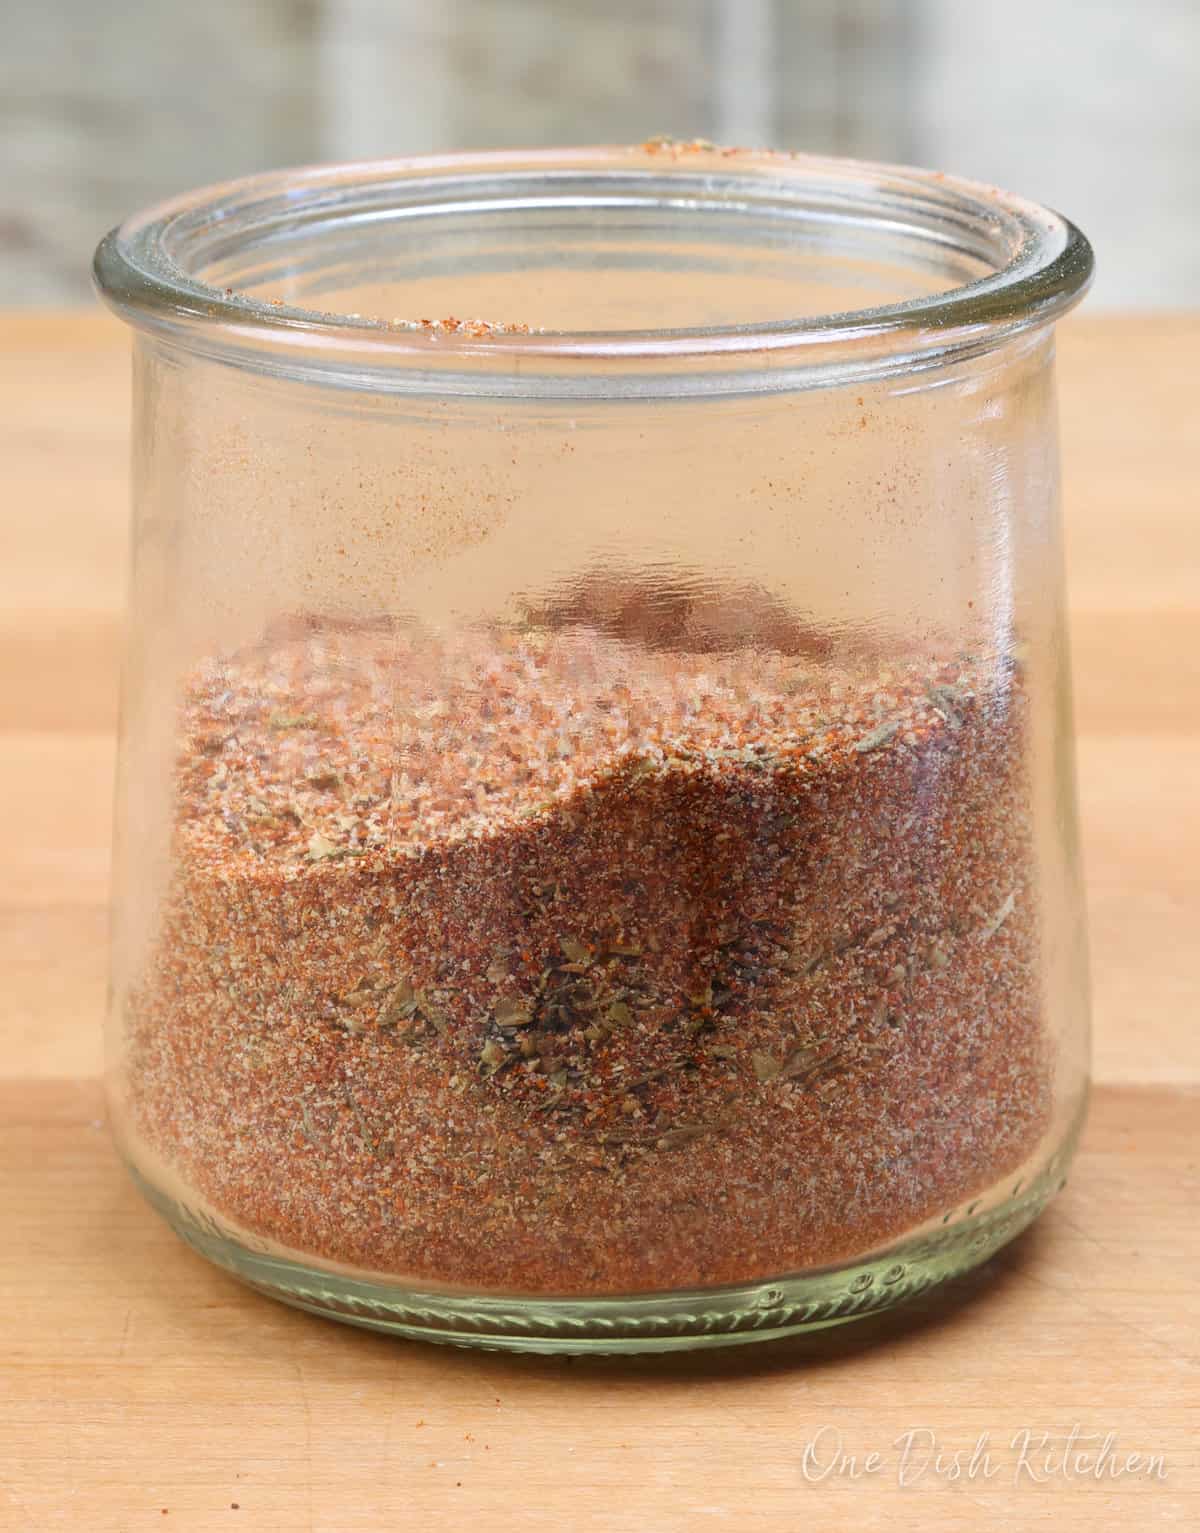 a small batch of creole seasoning in a jar on a kitchen counter.